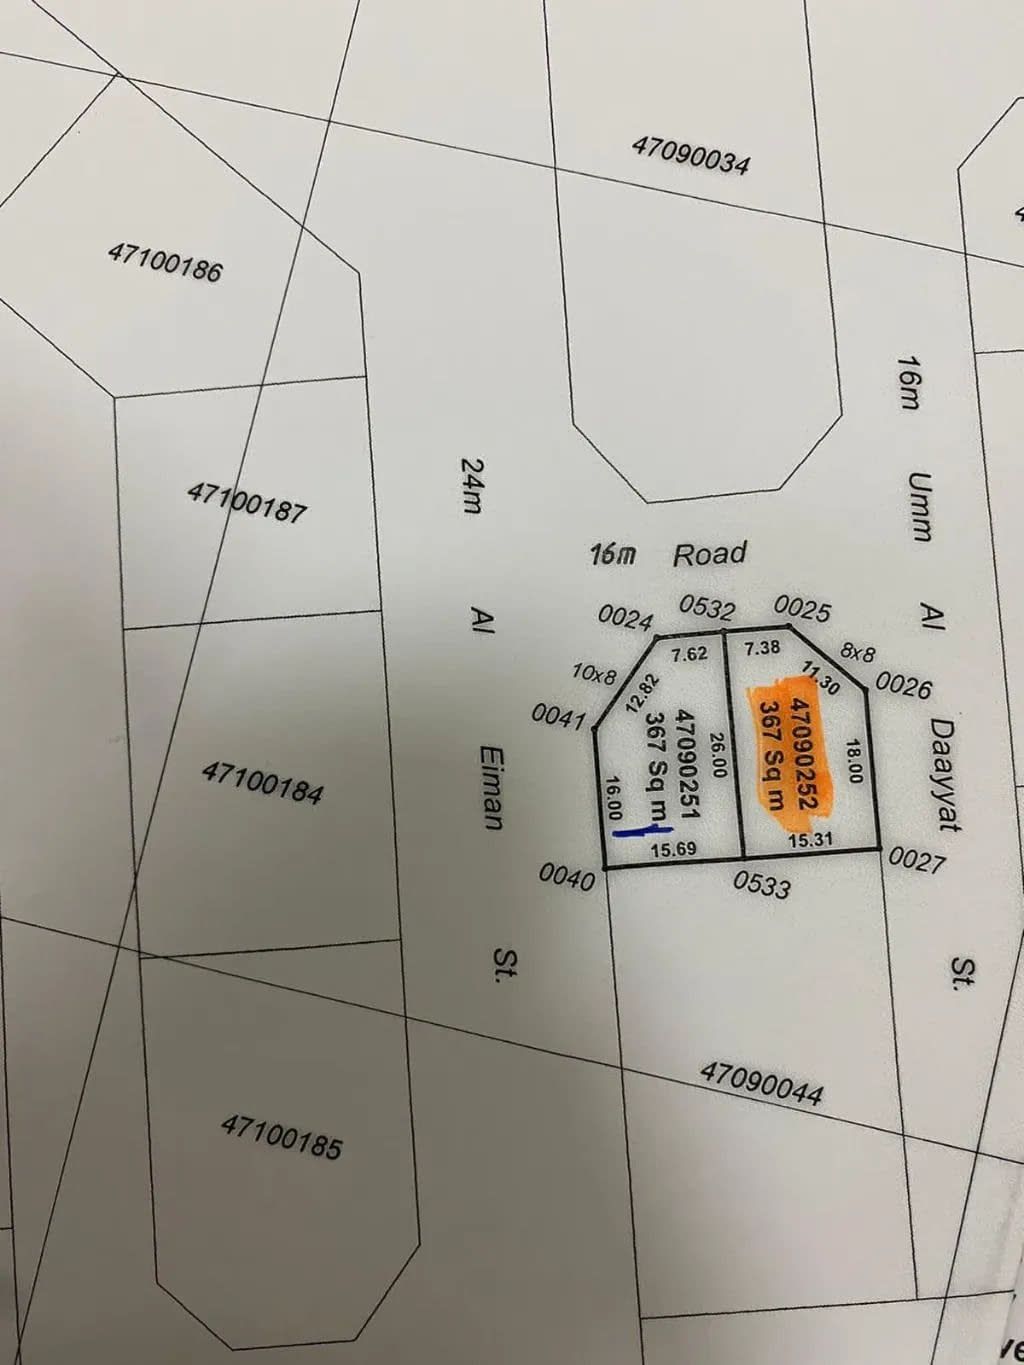 Residential Land Mixed Use Land  for sale in Al-Thumama , Doha-Qatar #19952 - 1  image 